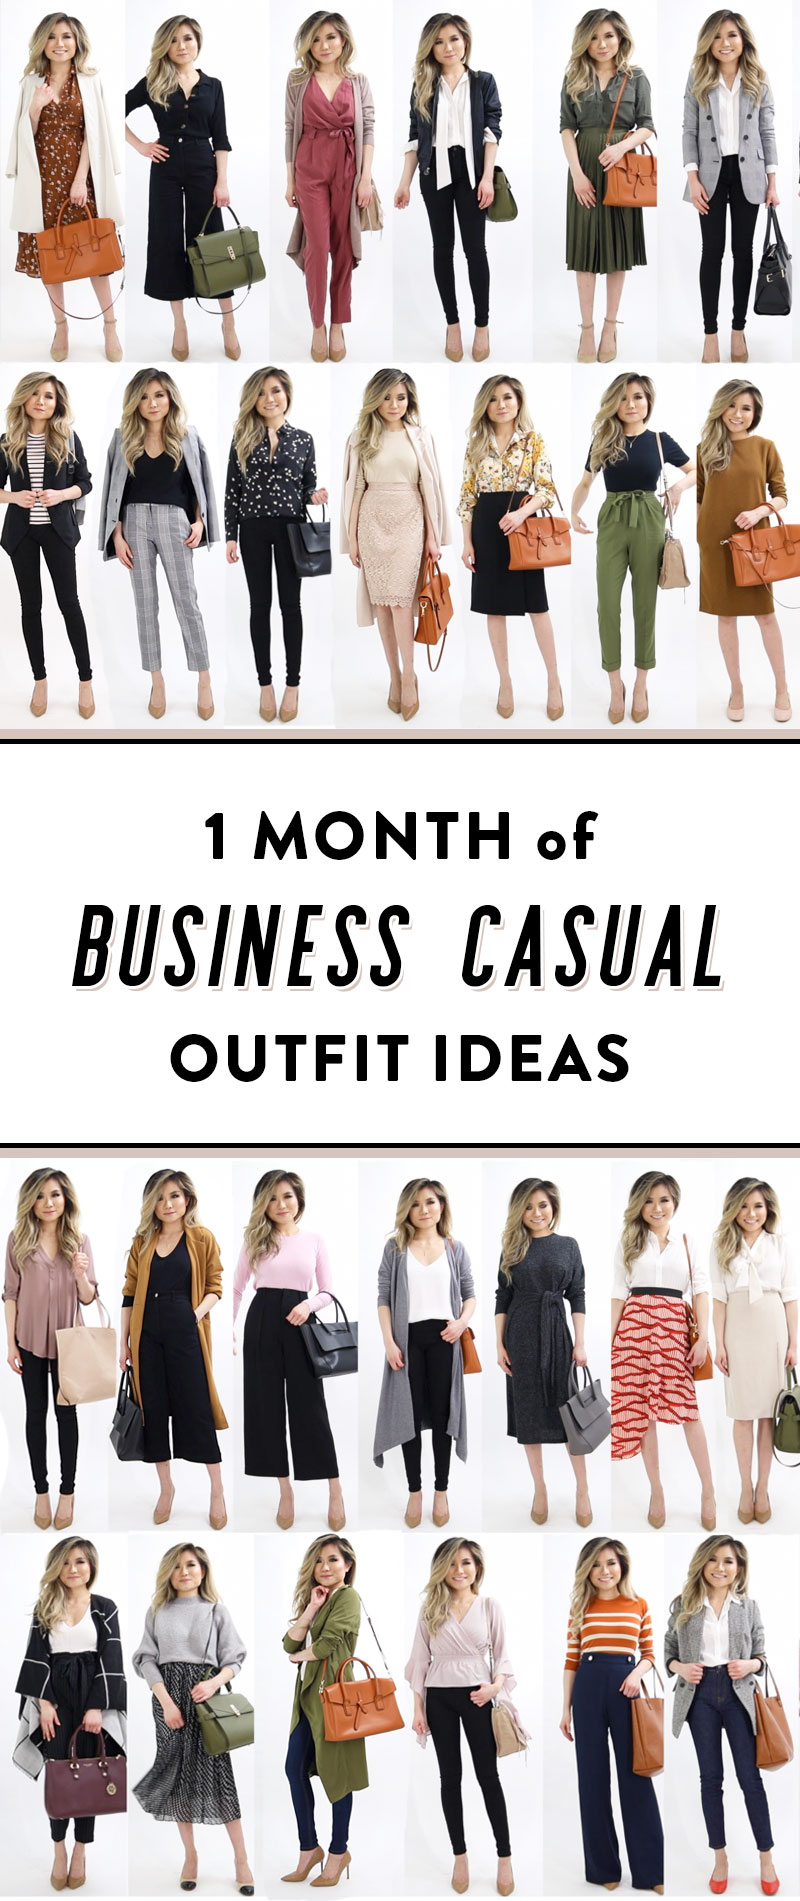 Smart Business Casual Women's Outfits Online Store, UP TO 54% OFF |  www.editorialelpirata.com